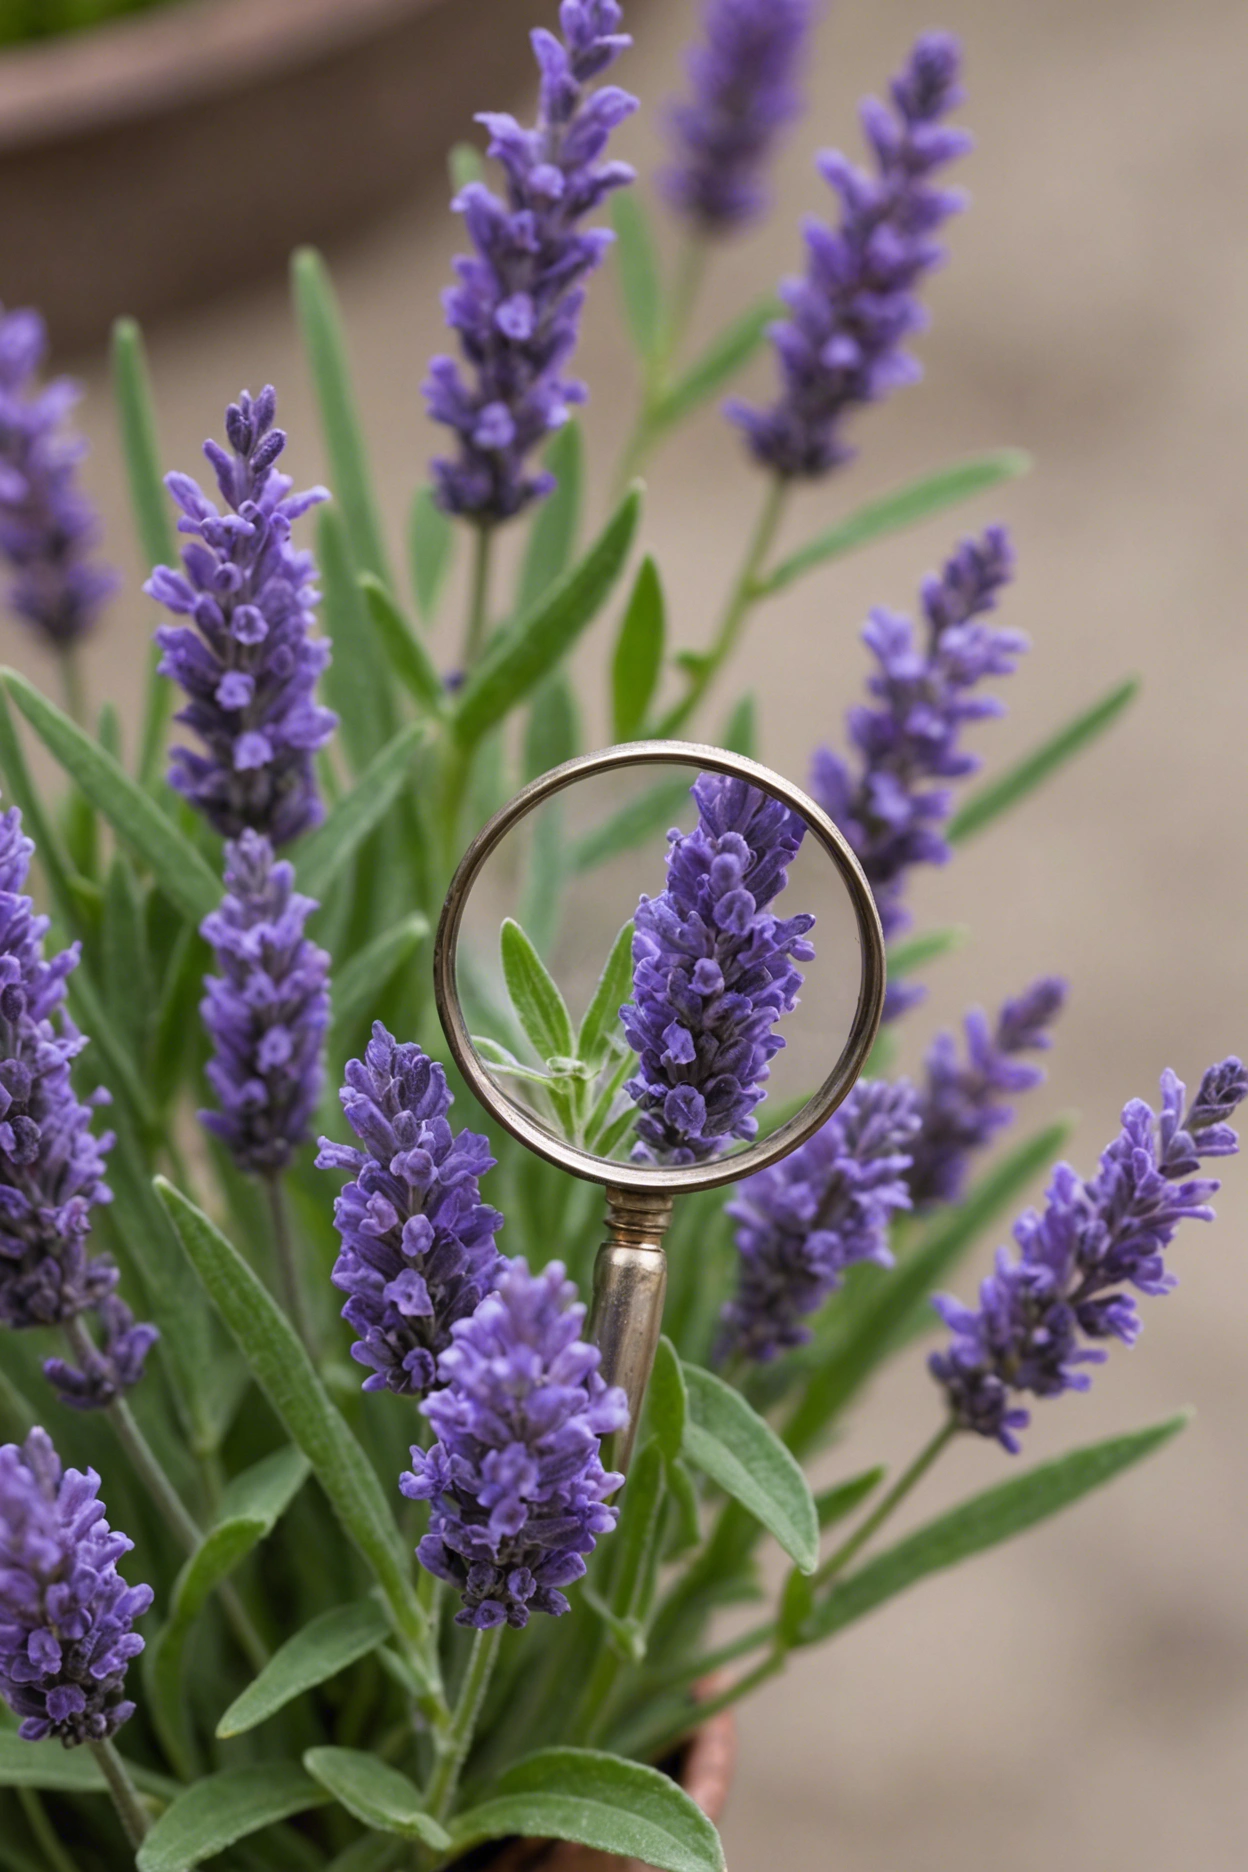 "Close-up of a lavender plant with curling leaves, magnifying glass and guidebook on lavender diseases in frame."